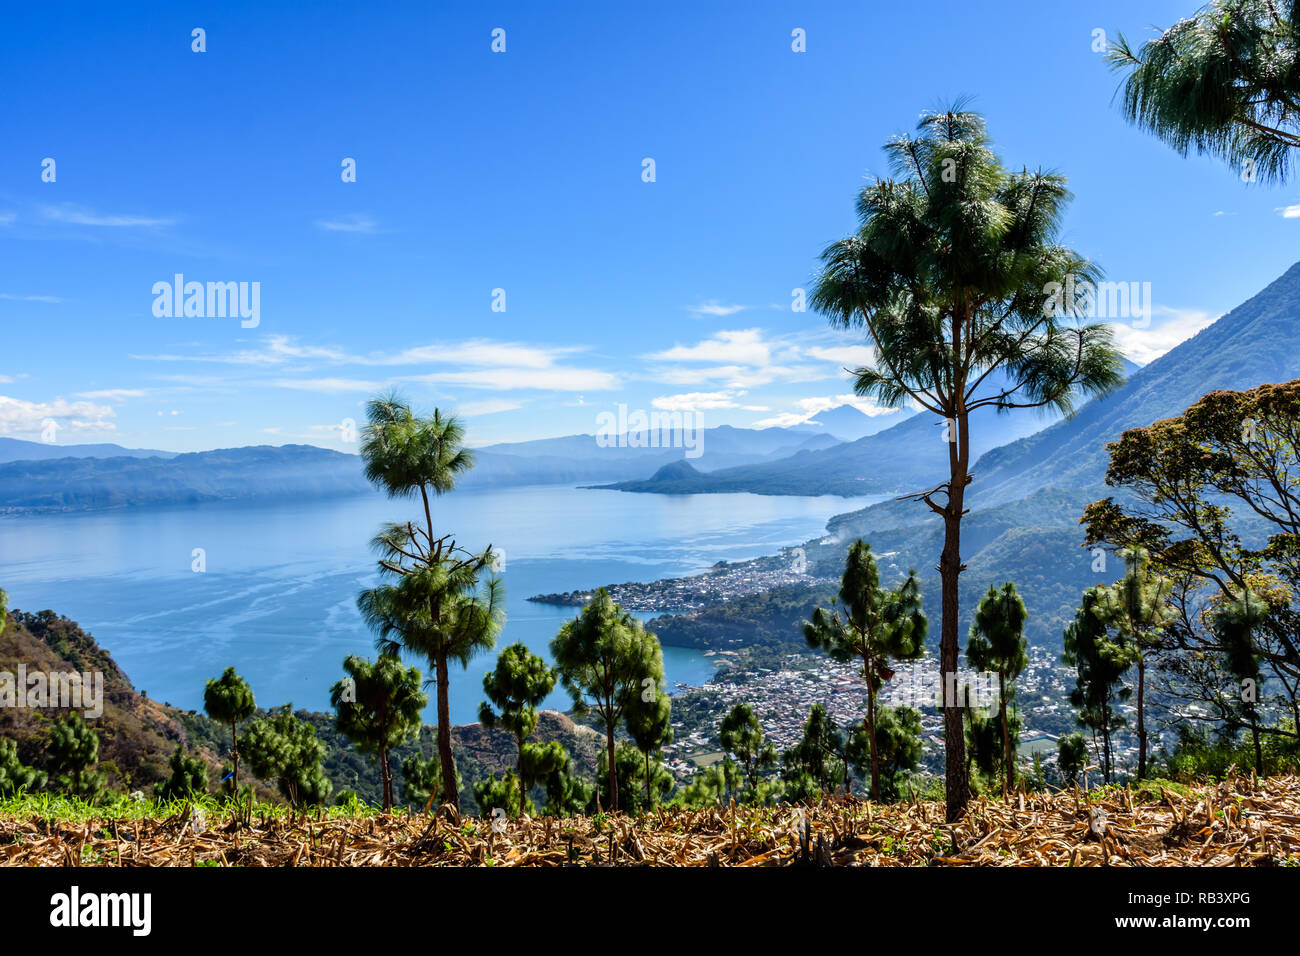 View of Lake Atitlan & 5 volcanoes looking from hilltop maize field in Guatemalan highlands. Stock Photo